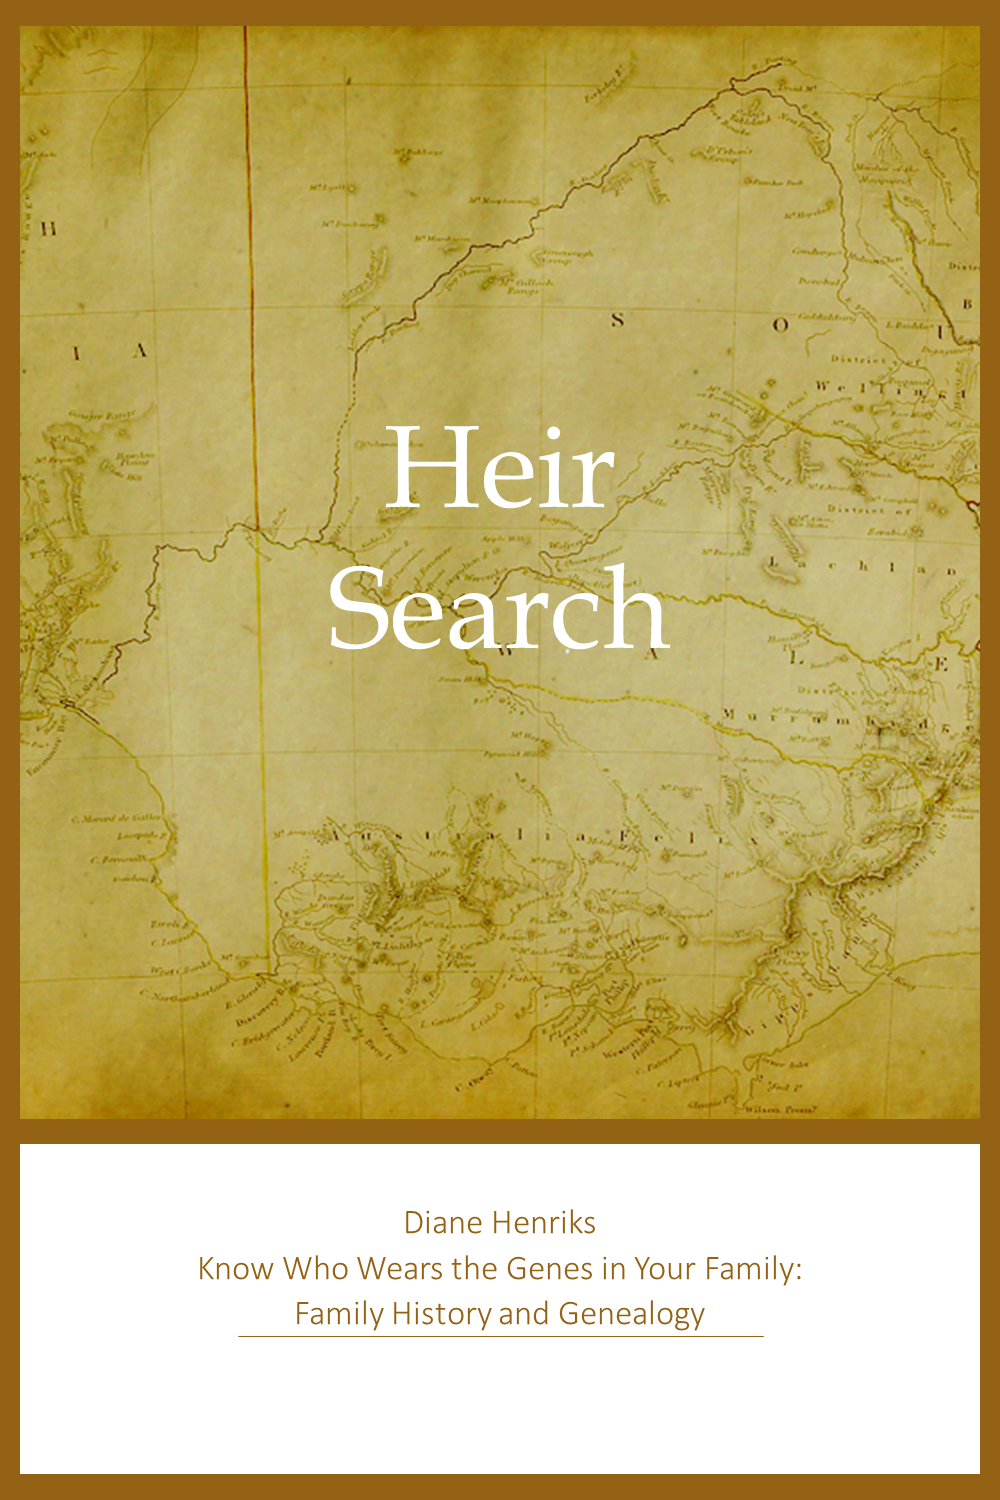 Heir Search by Diane Henriks at Know Who Wears the Genes in Your Family